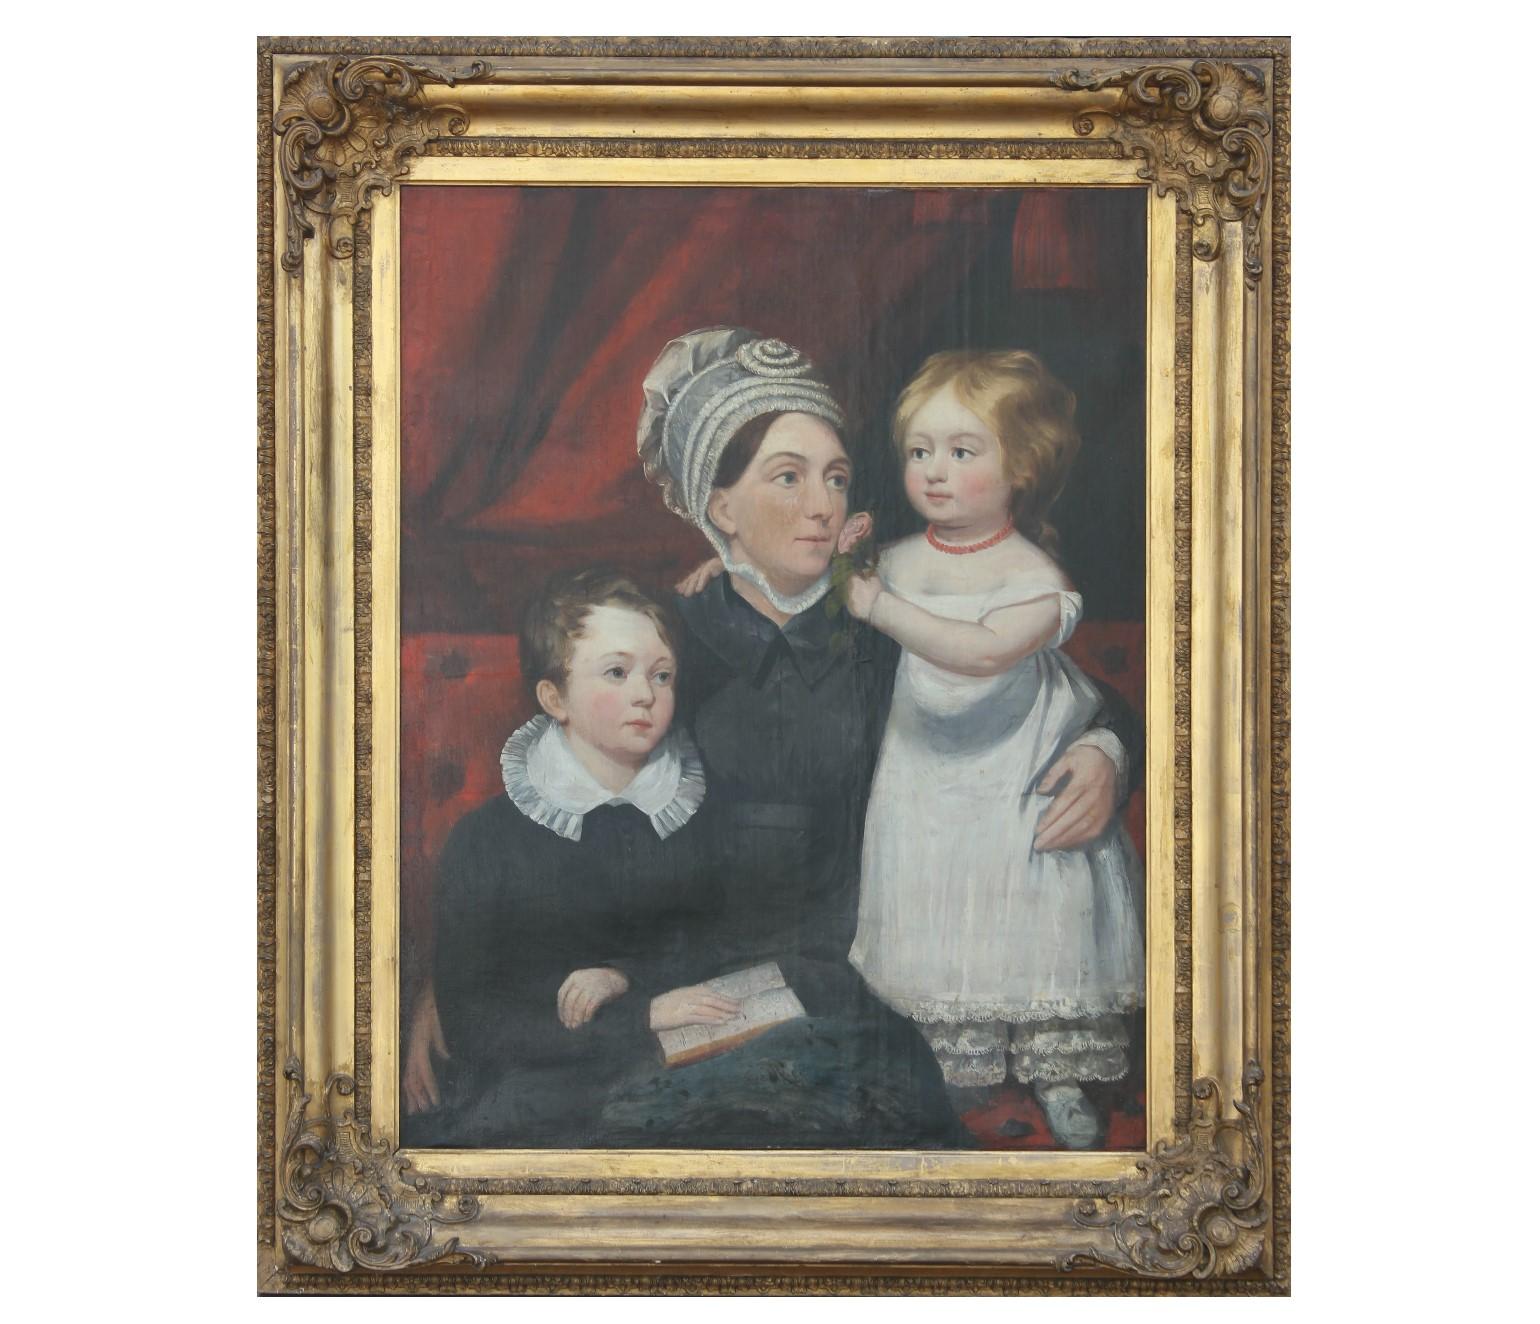 Unknown Portrait Painting - Late 18th Century English Family Portrait